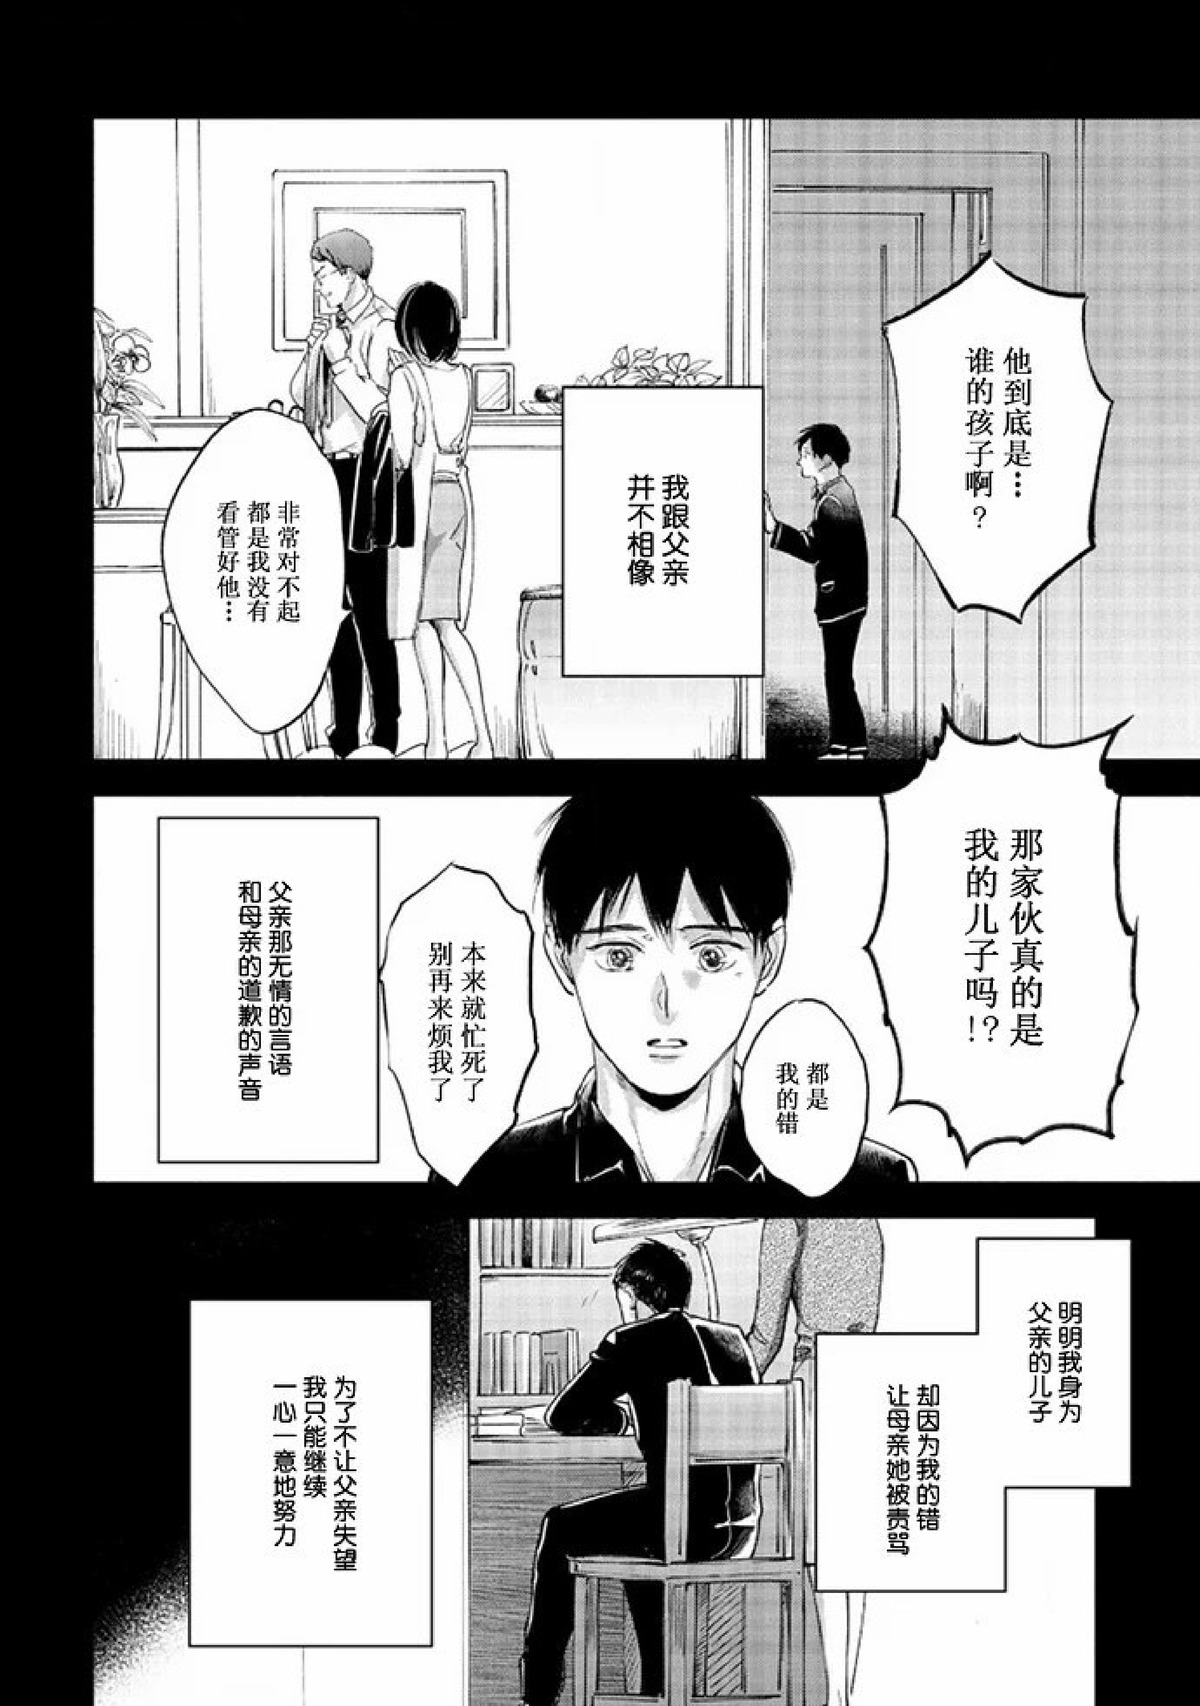 【Two sides of the same coin[耽美]】漫画-（上卷01-02）章节漫画下拉式图片-22.jpg